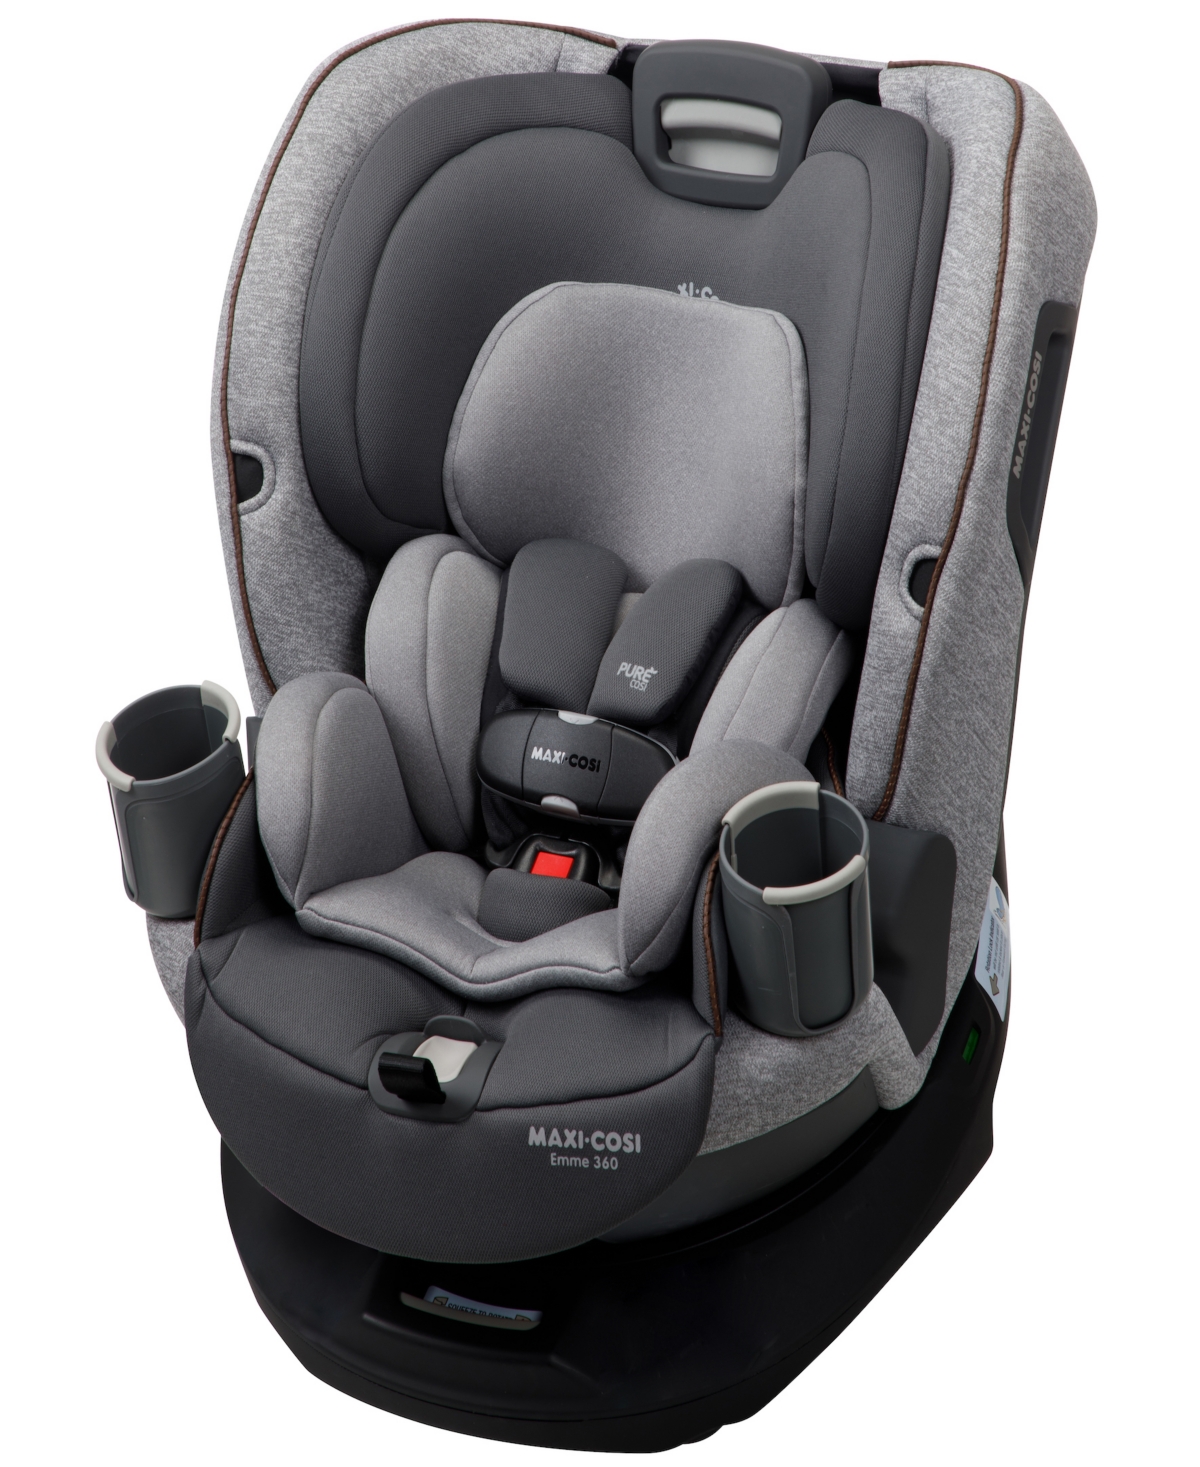 Maxi-cosi Baby Girls And Boys Emme 360 Rotating All-in-one Convertible Car Seat In Urban Wonder